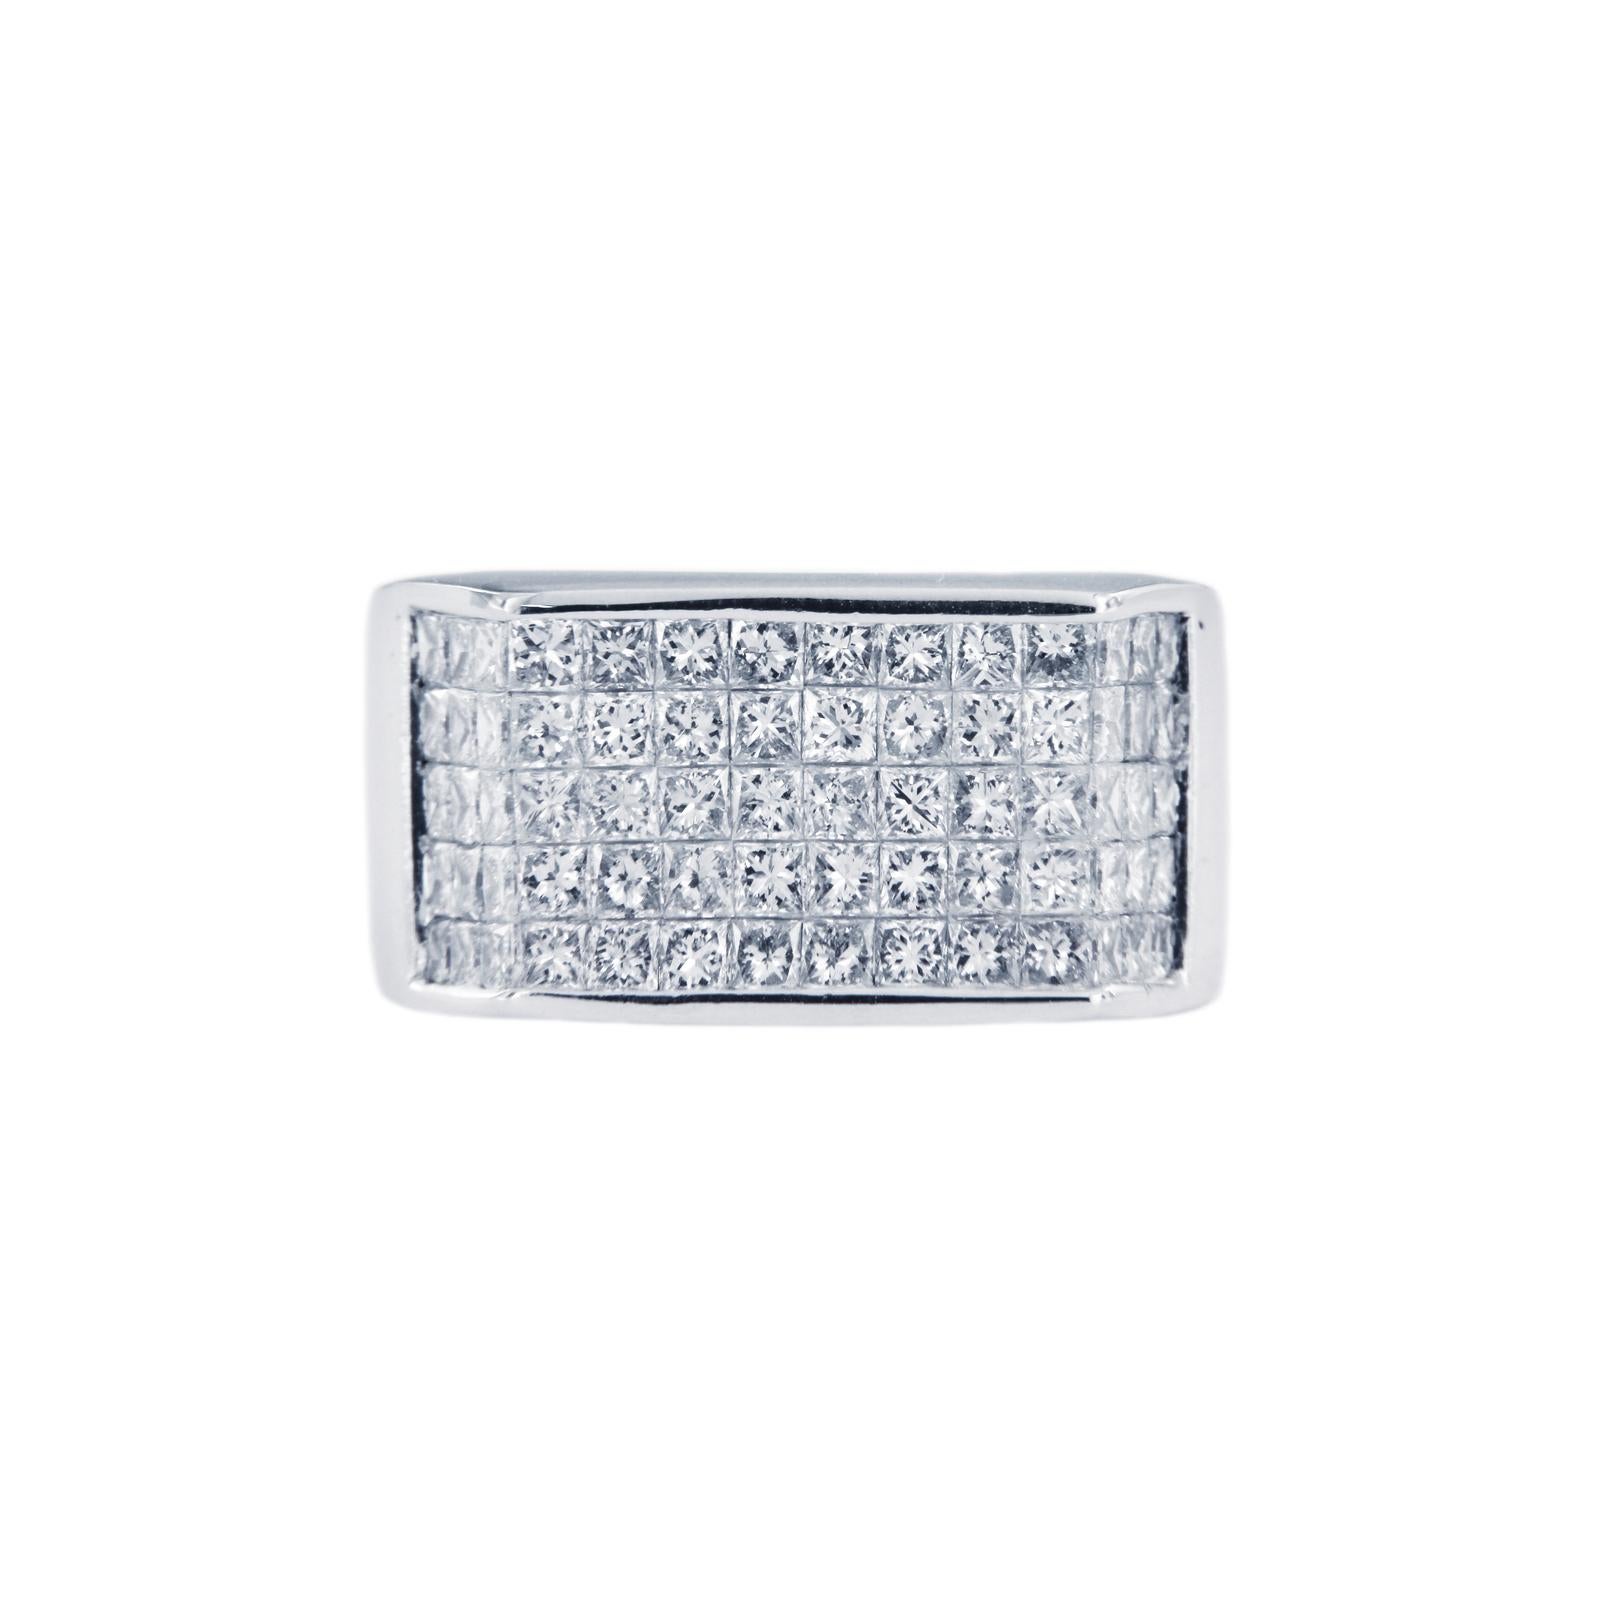 14K WHITE GOLD PINKY RING WITH 2.5CT DIAMONDS 

-Custom made
-14k White Gold
-Ring size: 7
-Diamond: 2.5ct, VS clarity, G color
-Width: 11.6mm

RETAIL: $5500